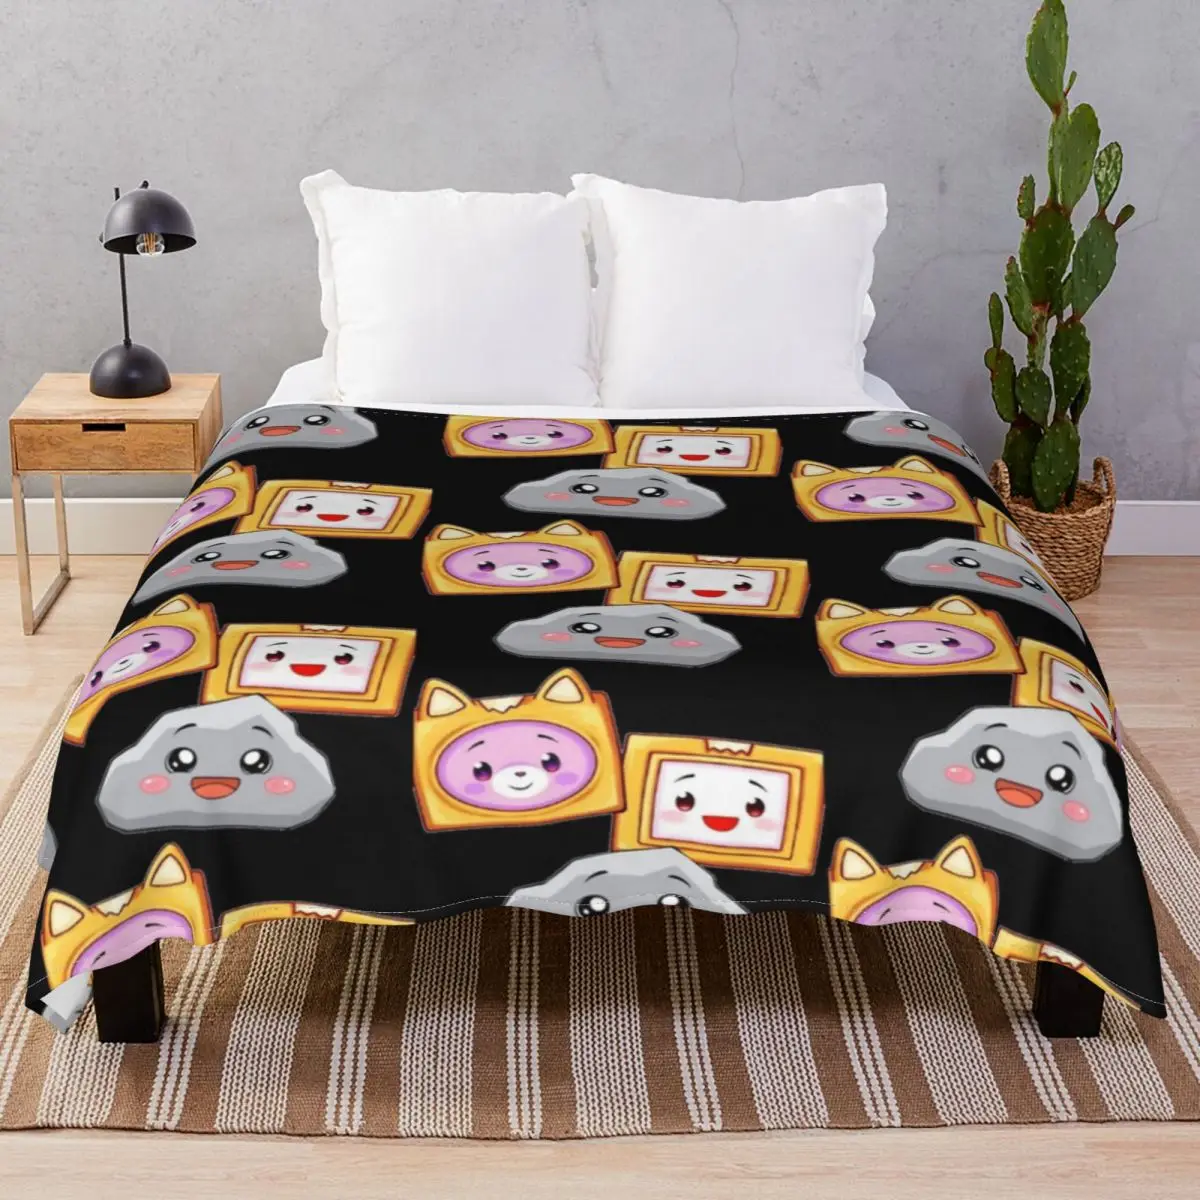 

Foxy And Boxy And Rocky Lankybox Blanket Flannel Printed Lightweight Unisex Throw Blankets for Bedding Sofa Camp Cinema